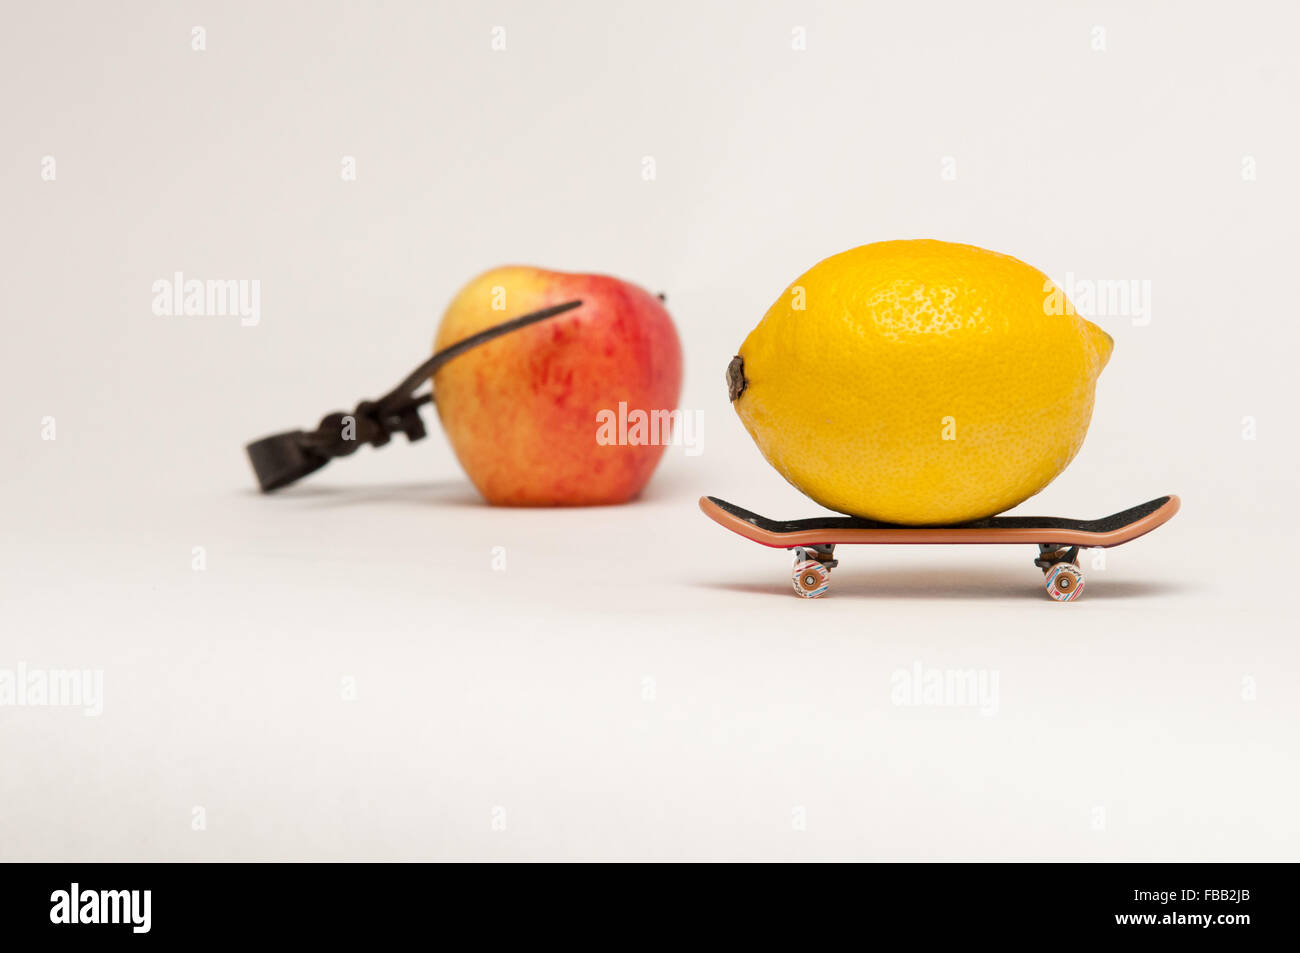 Lemon on a skateboard to represent sport and healthy living Stock Photo